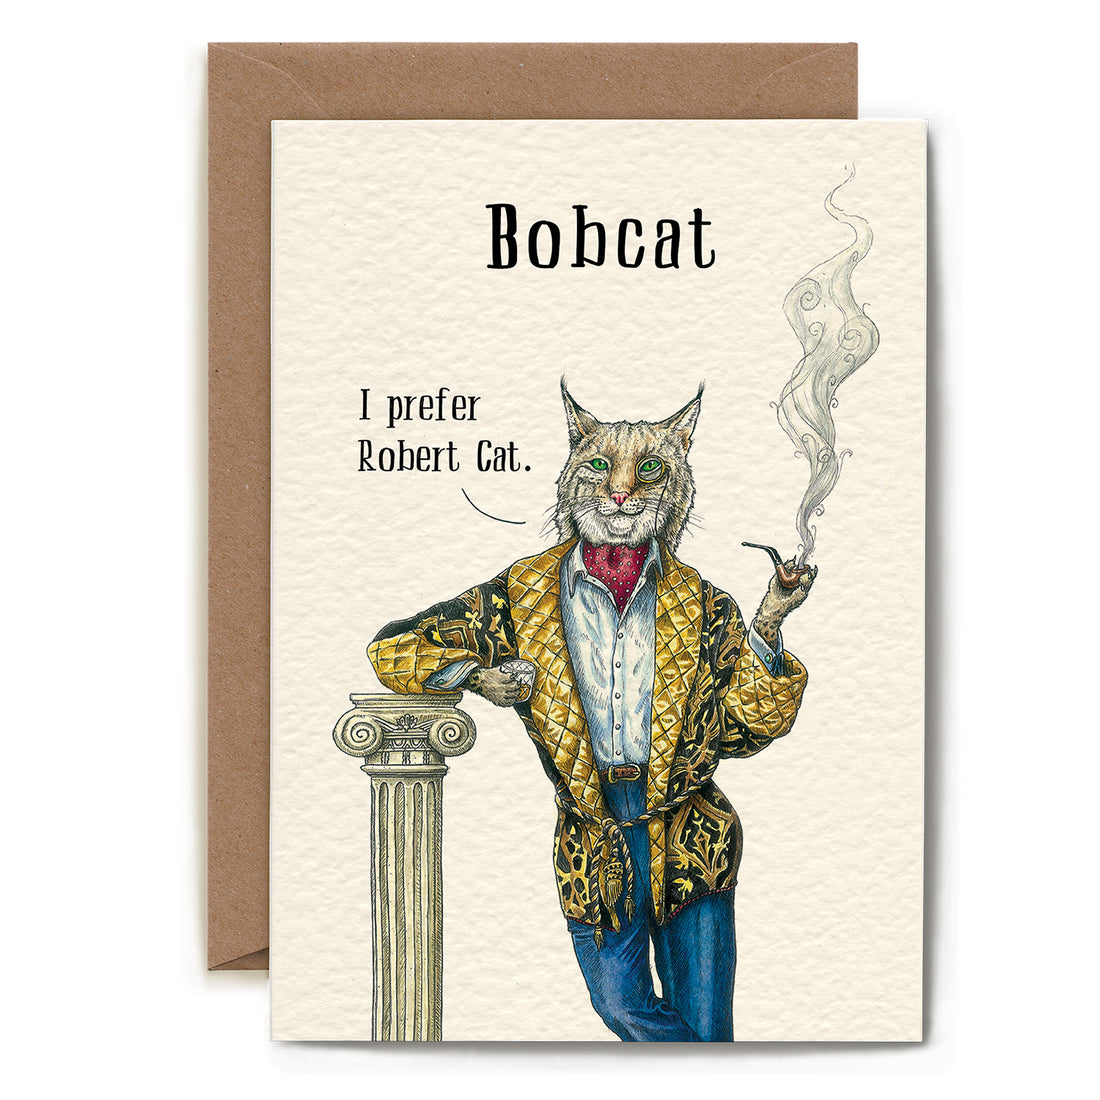 A Bobcat Card created by Hester &amp; Cook, a stationery company.